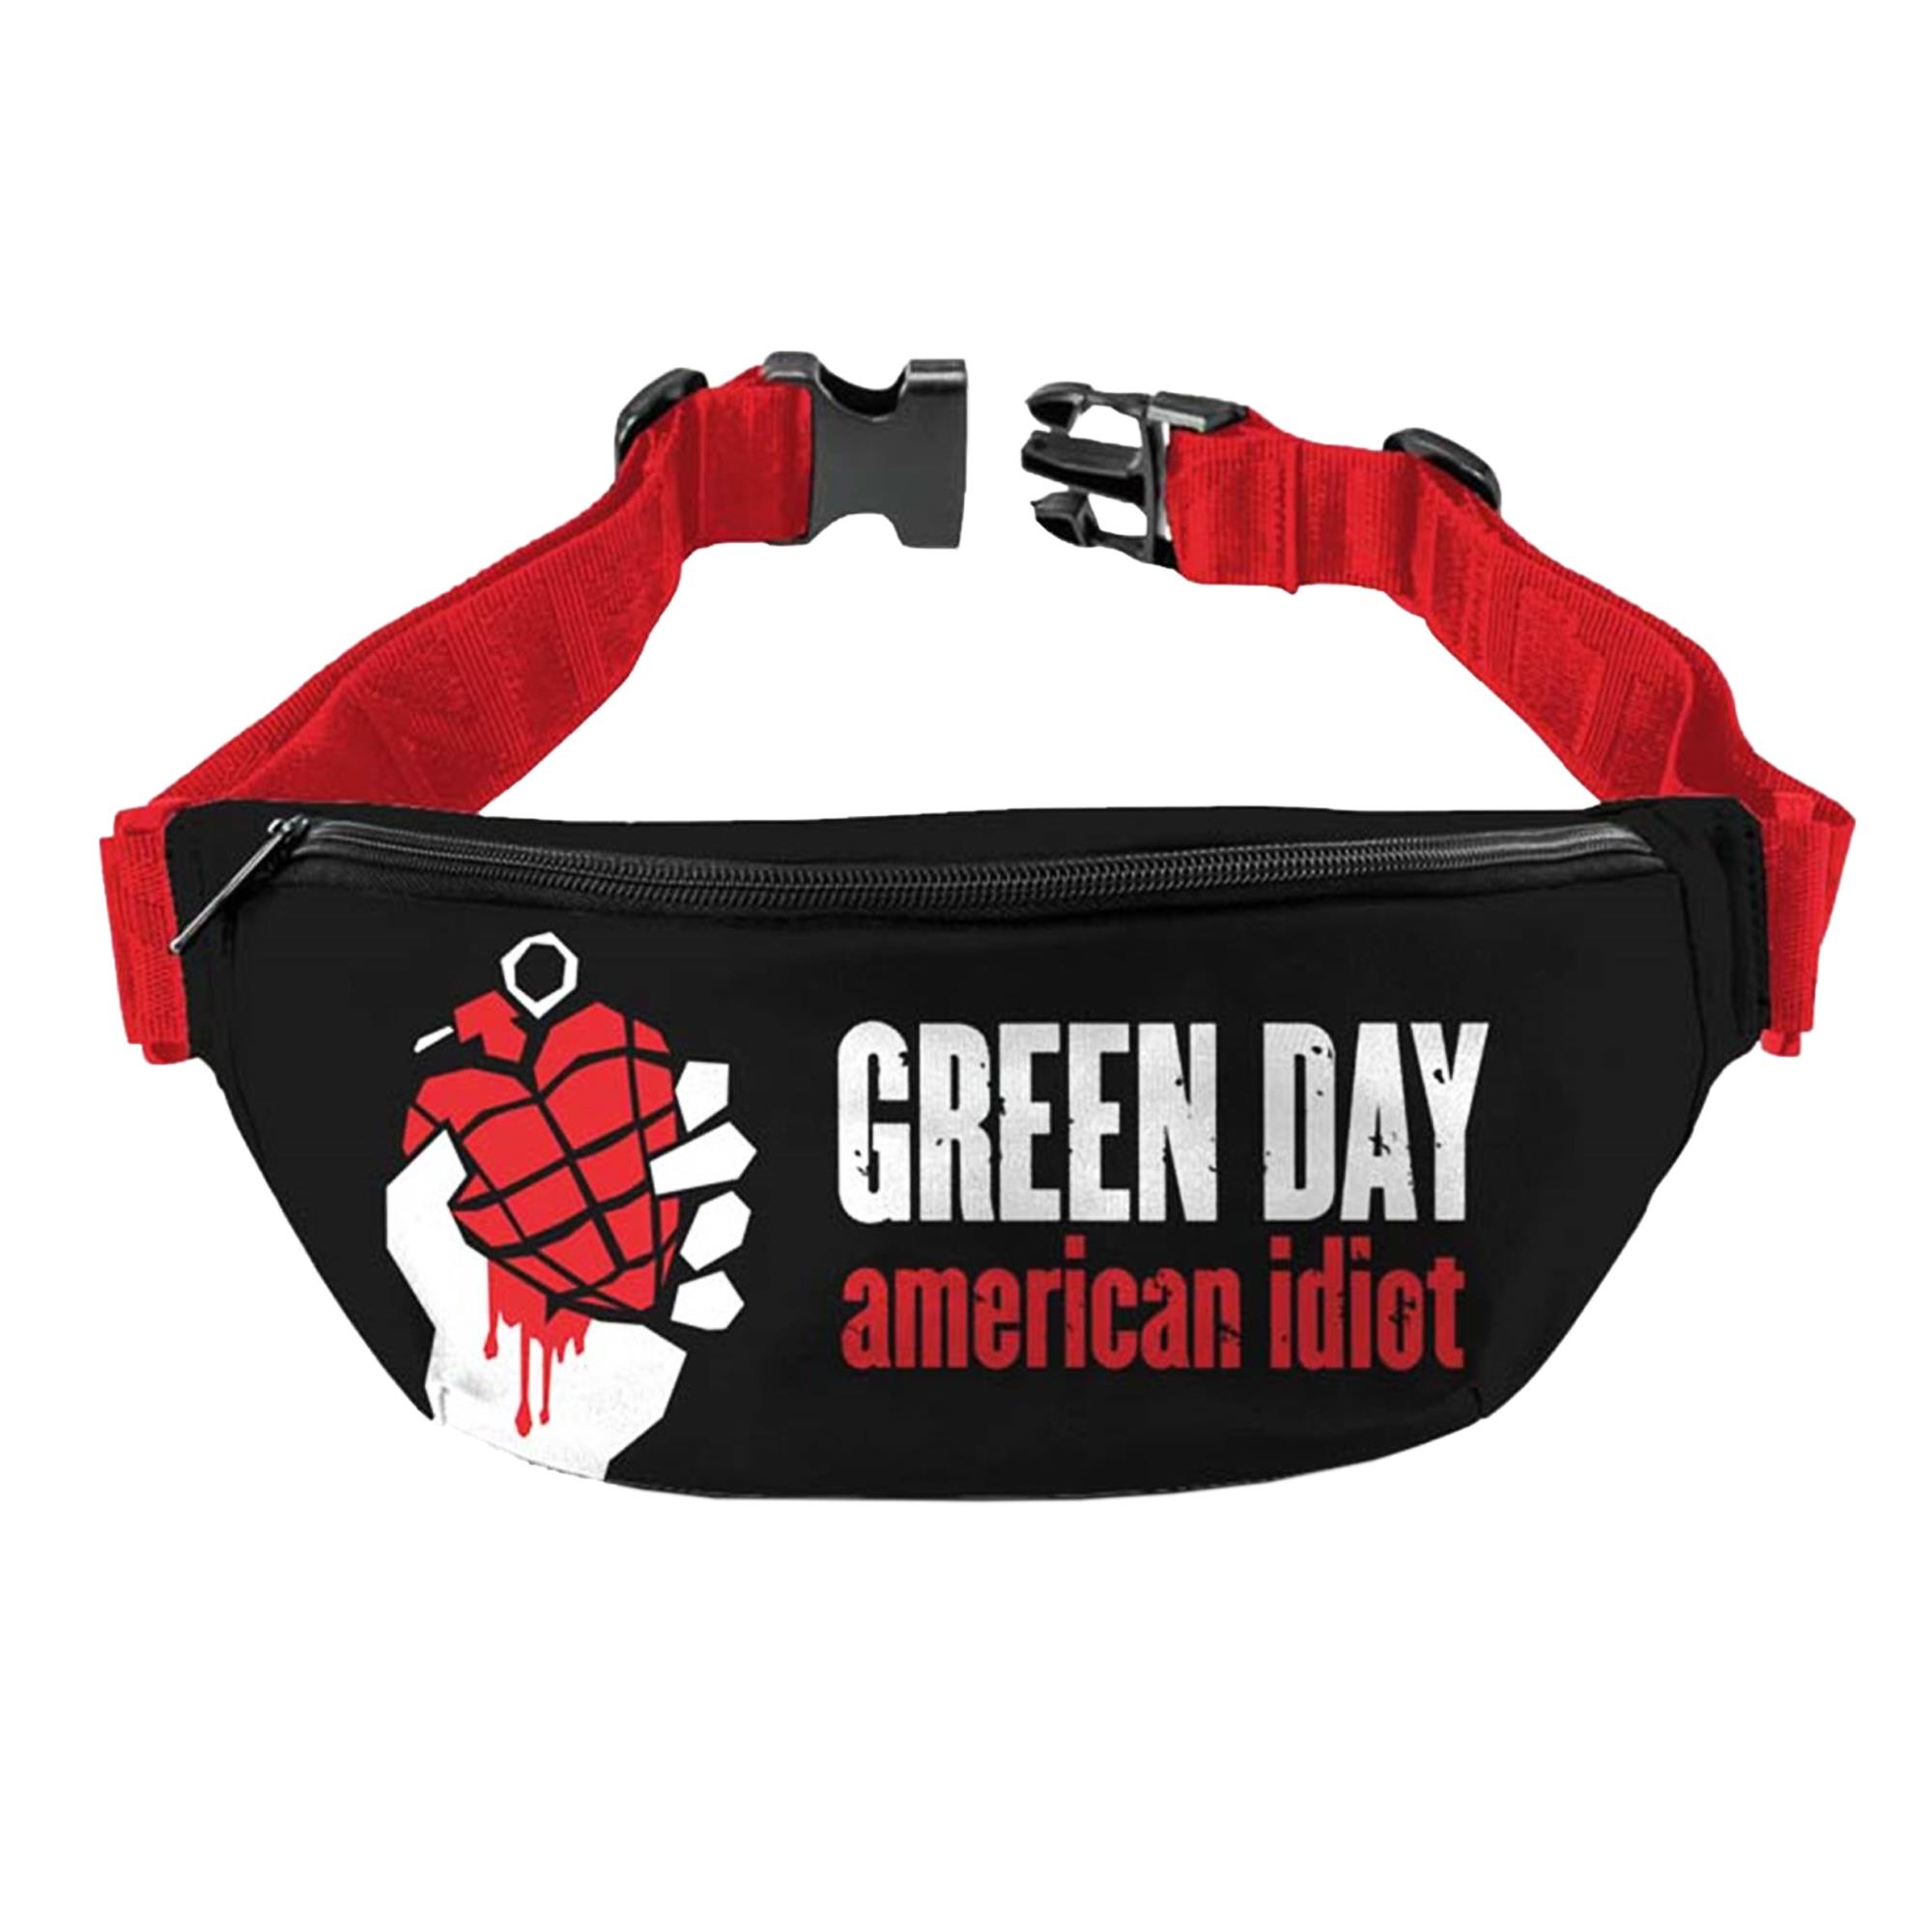 American Idiot Fanny Pack